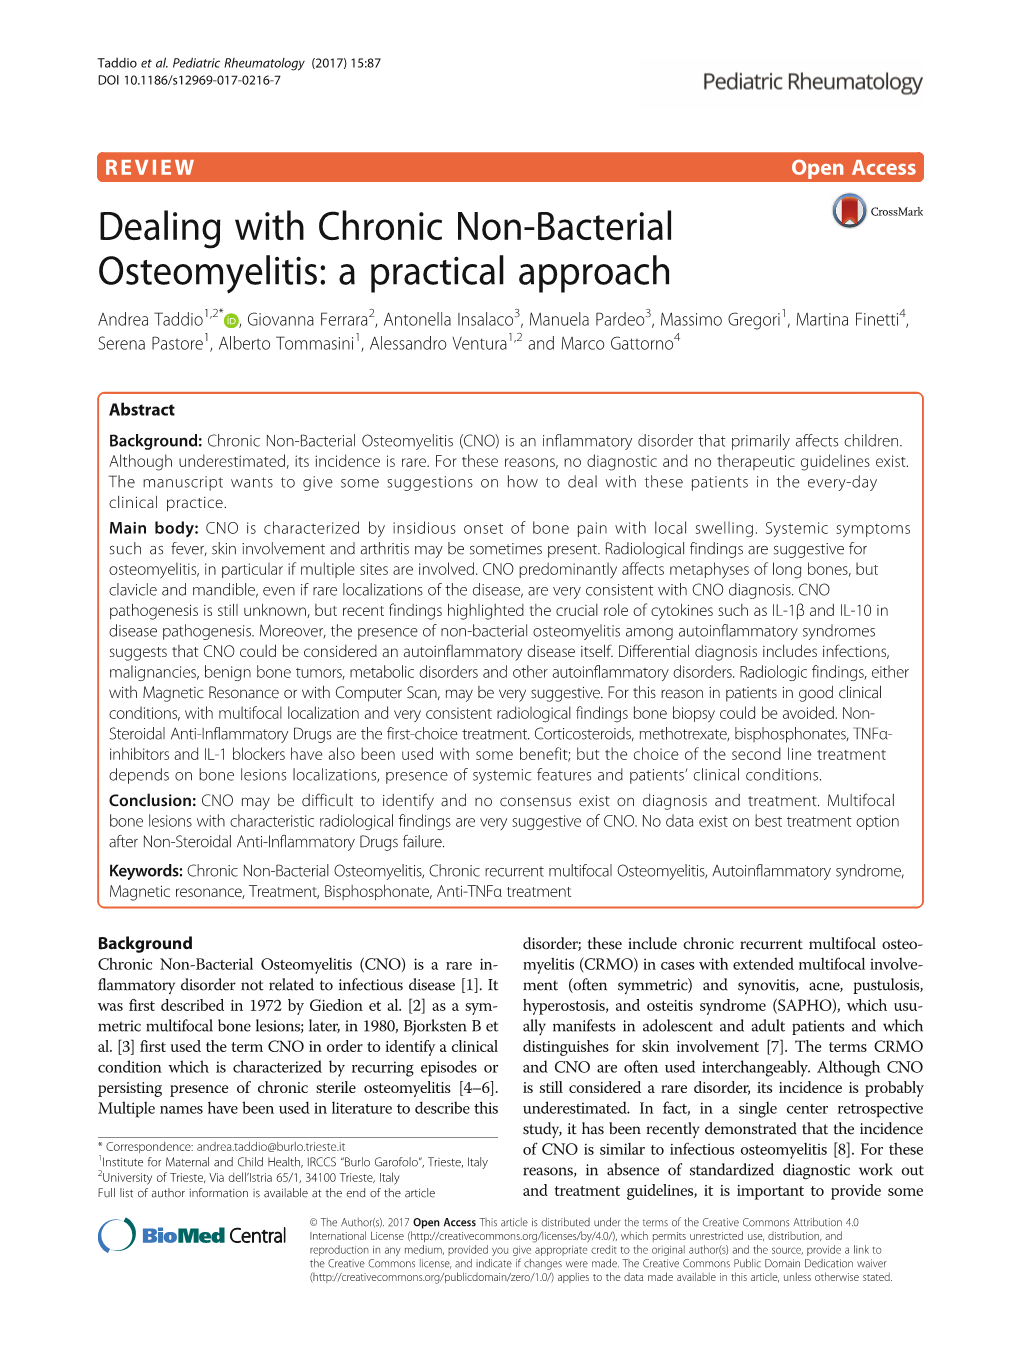 Dealing with Chronic Non-Bacterial Osteomyelitis: a Practical Approach